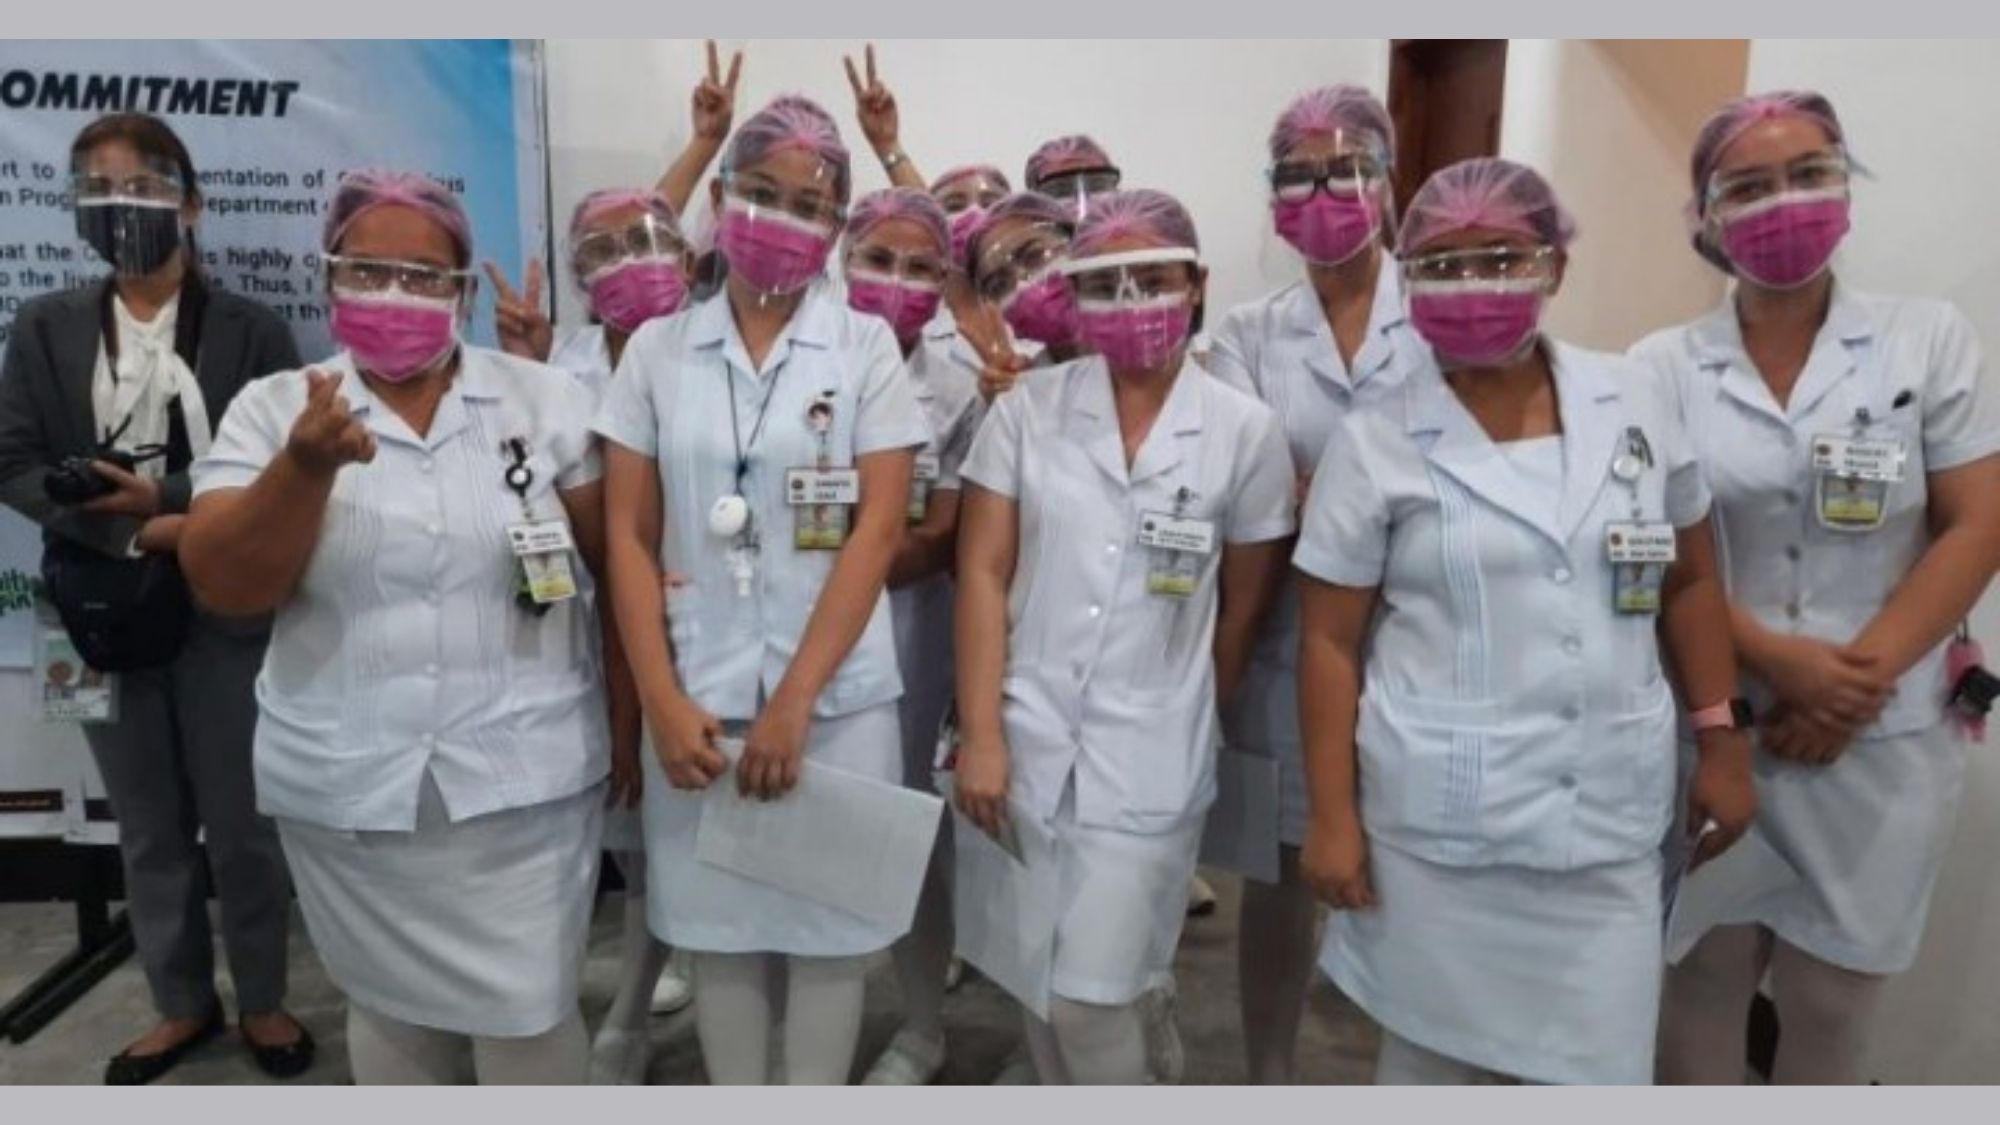 For future pandemics CHED asked to end moratorium on new nursing programs 